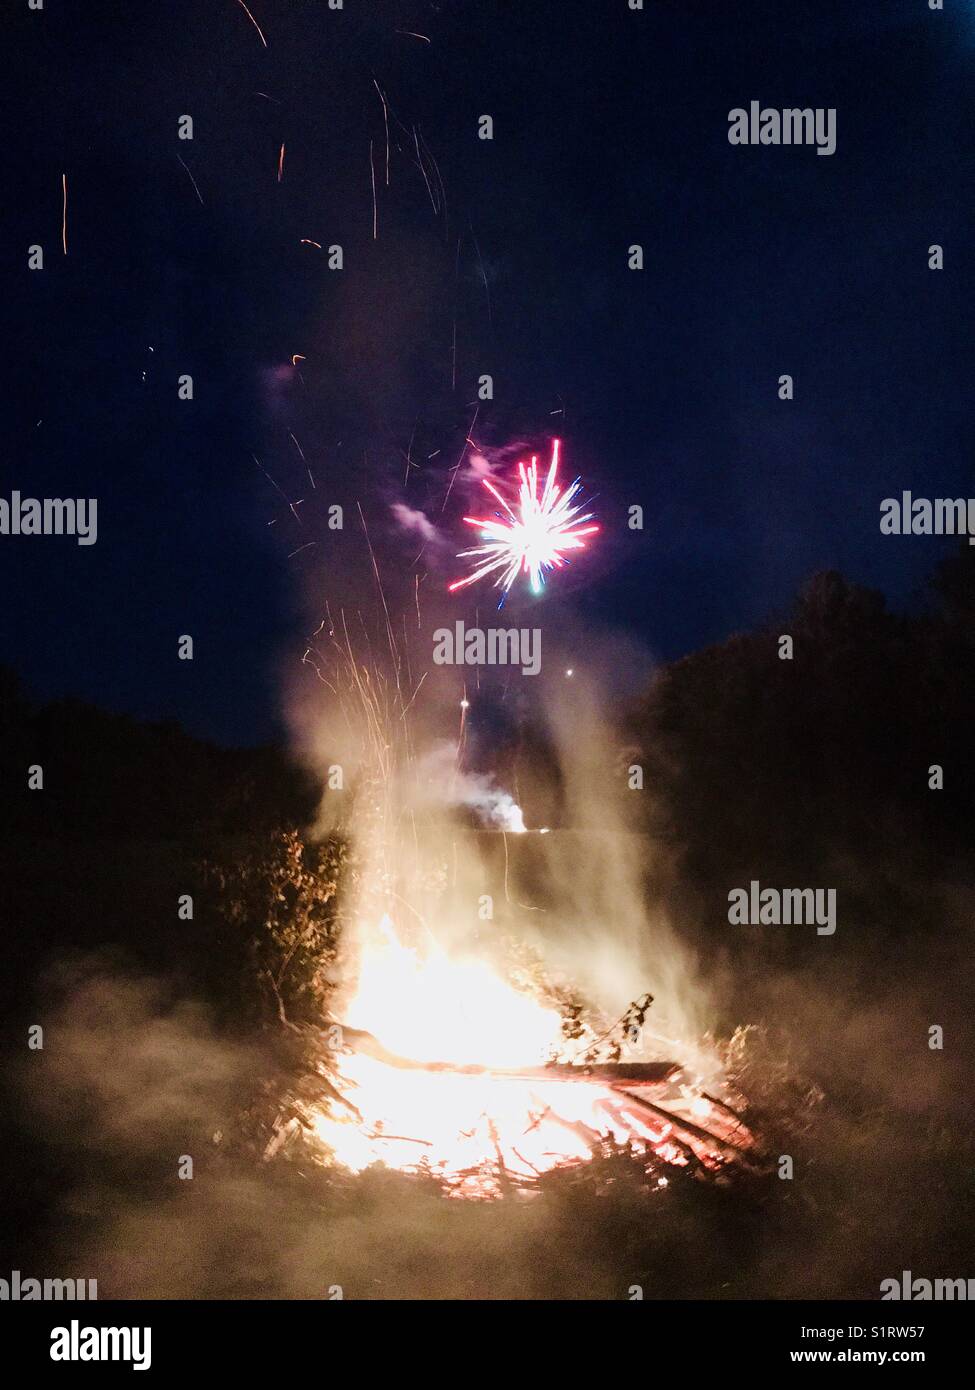 Fireworks exploding above a campfire Stock Photo